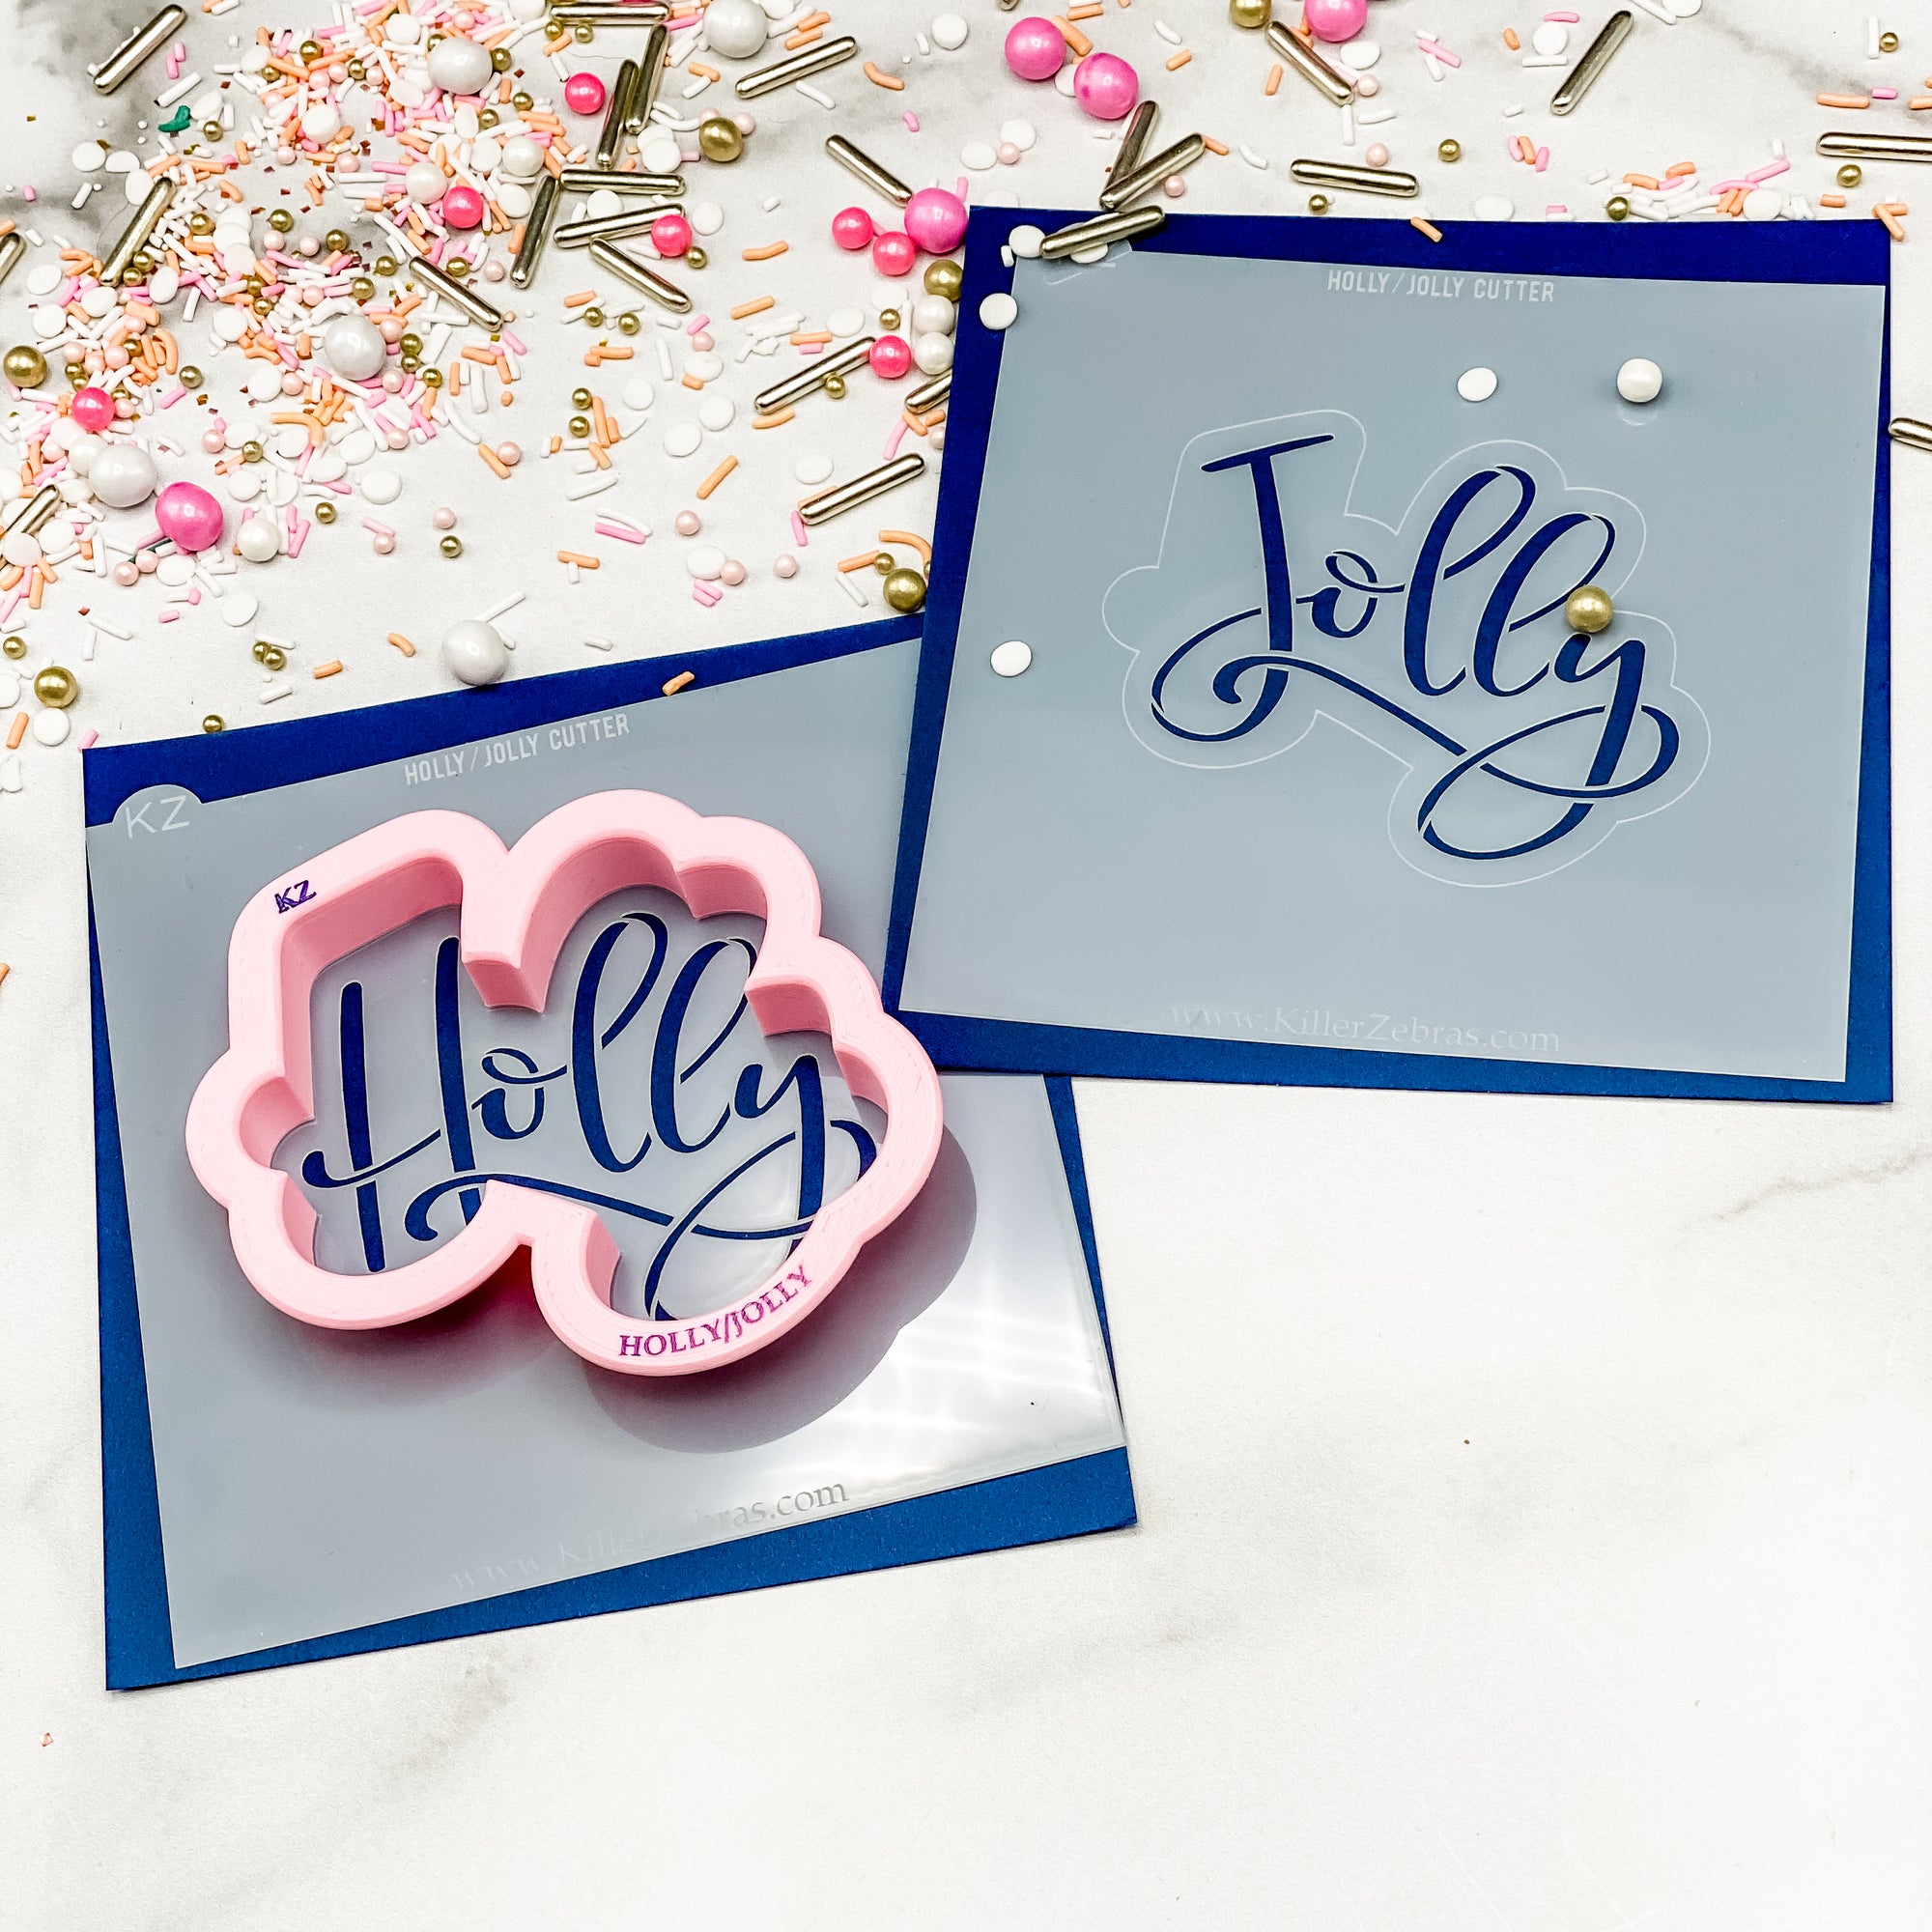 Holly/Jolly Hand Lettered